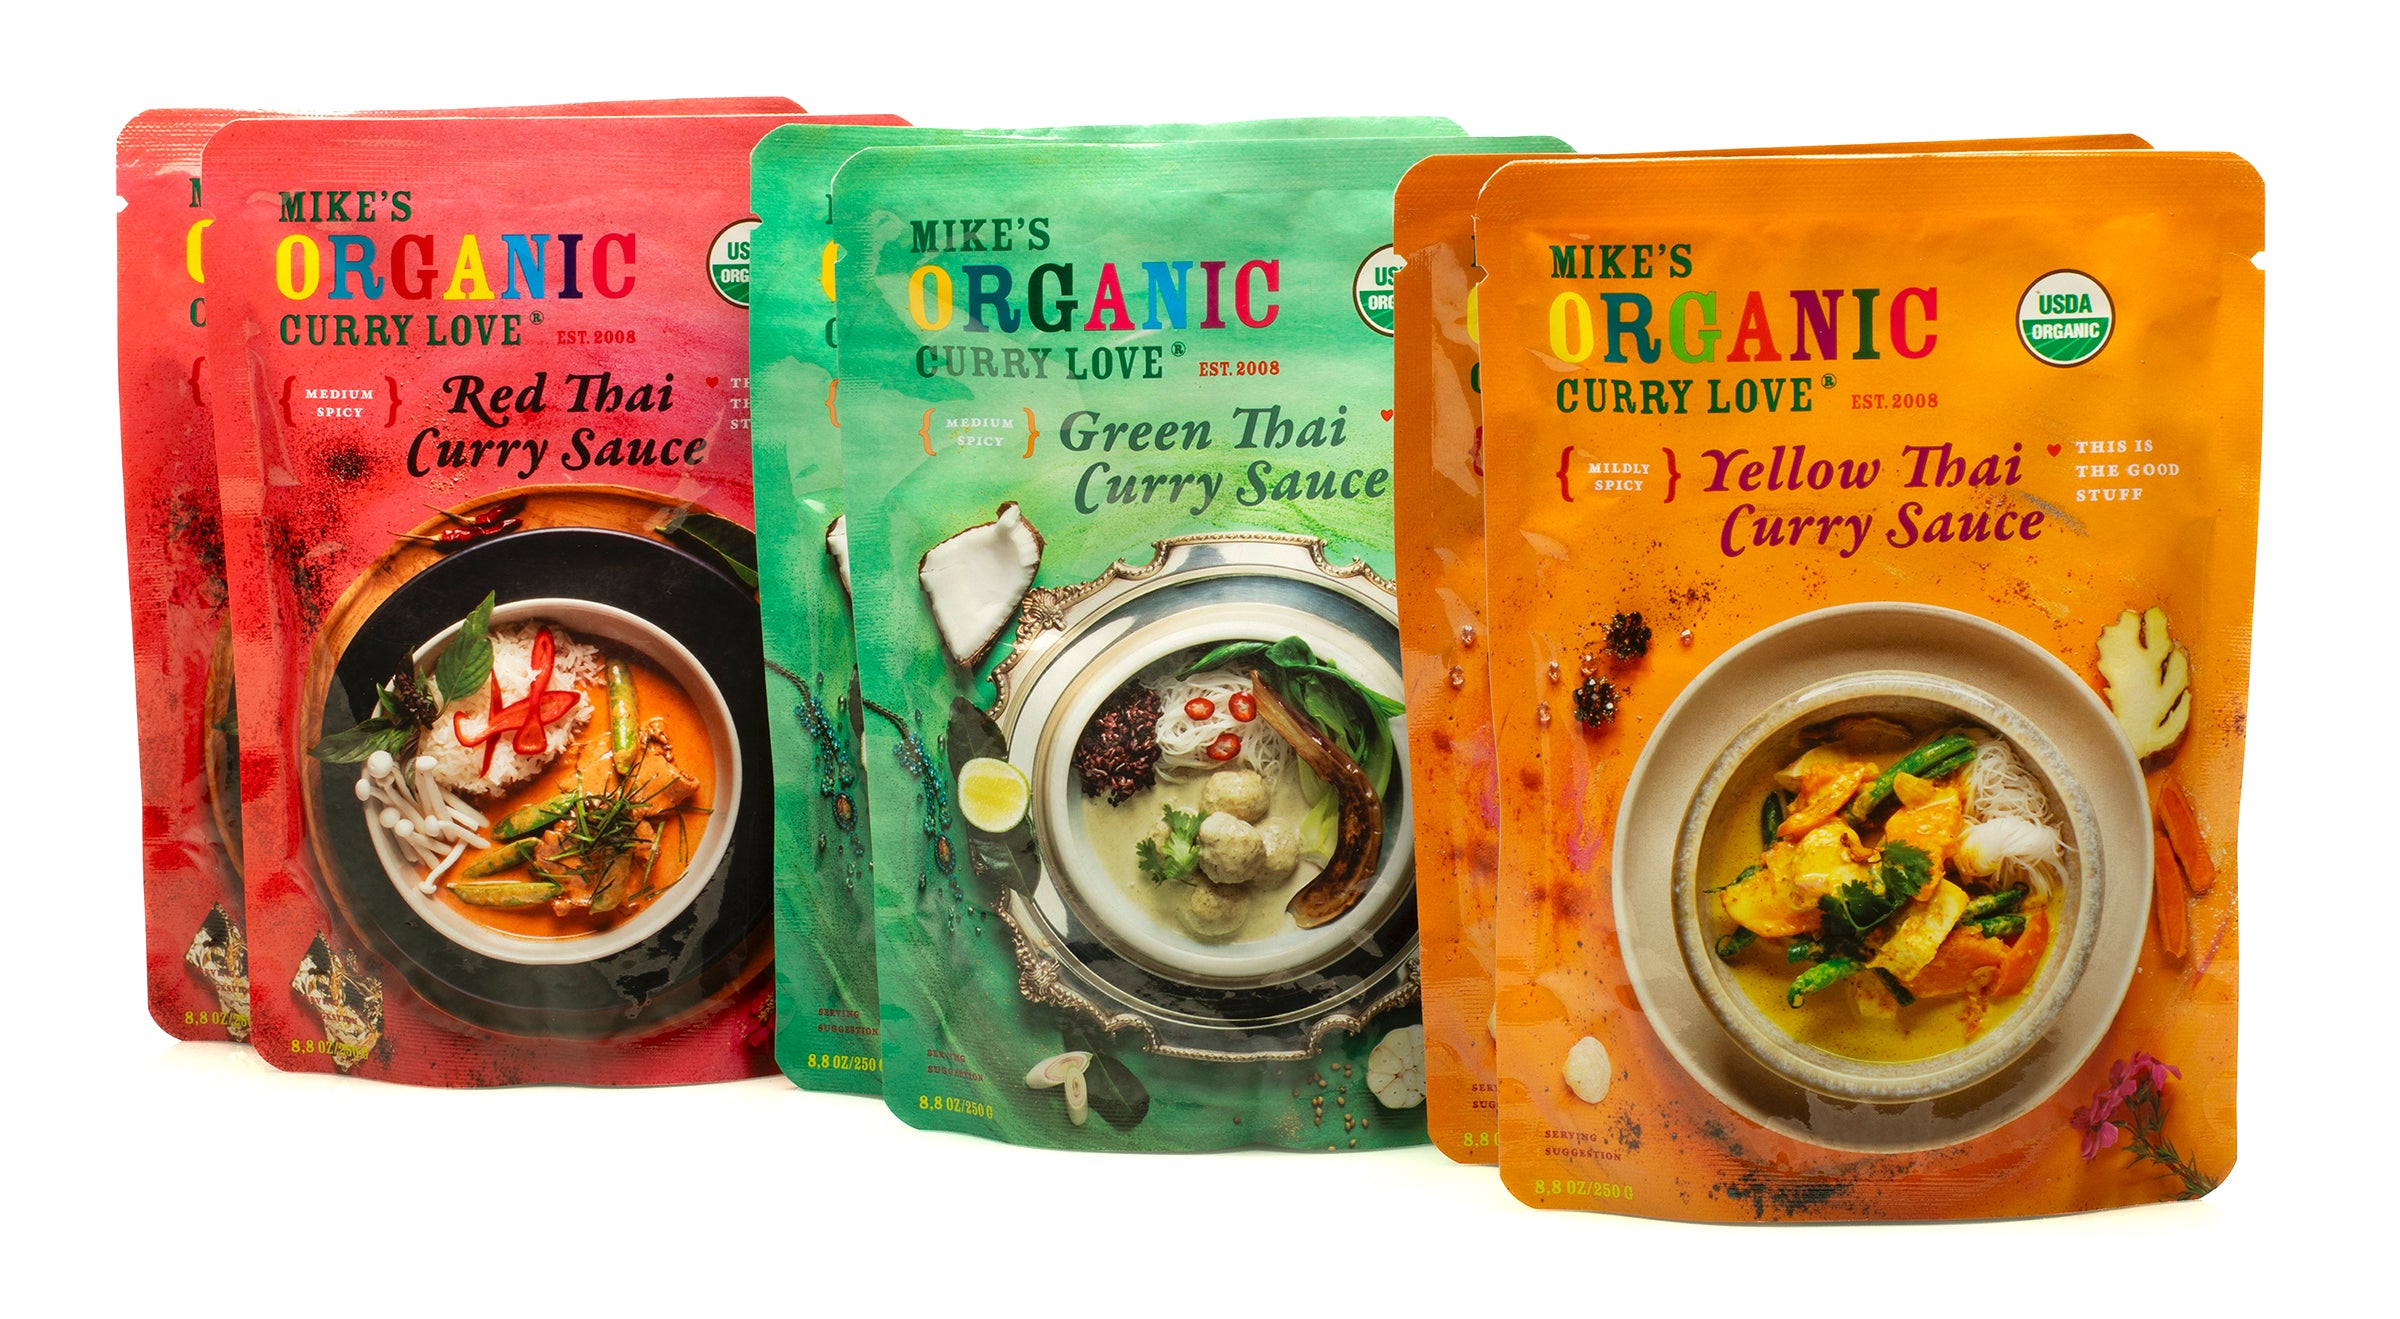 Variety 6 Pack of Curry Sauces - 6 x 8.8 oz pouches | 2 Red, 2 Green, 2 Yellow